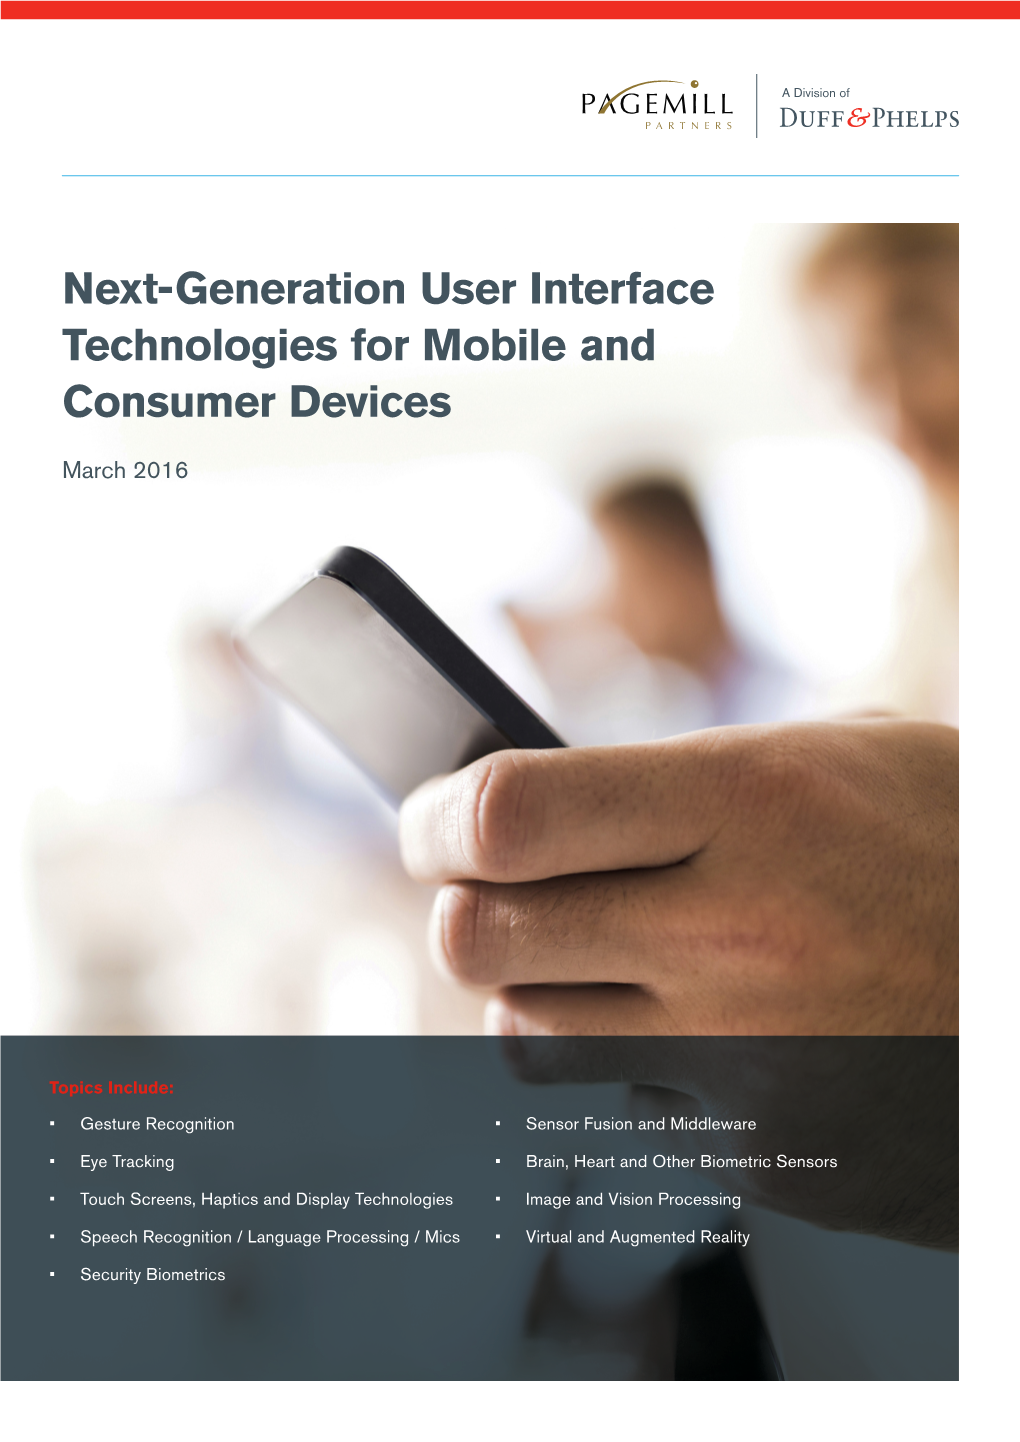 Next-Generation User Interface Technologies for Mobile and Consumer Devices